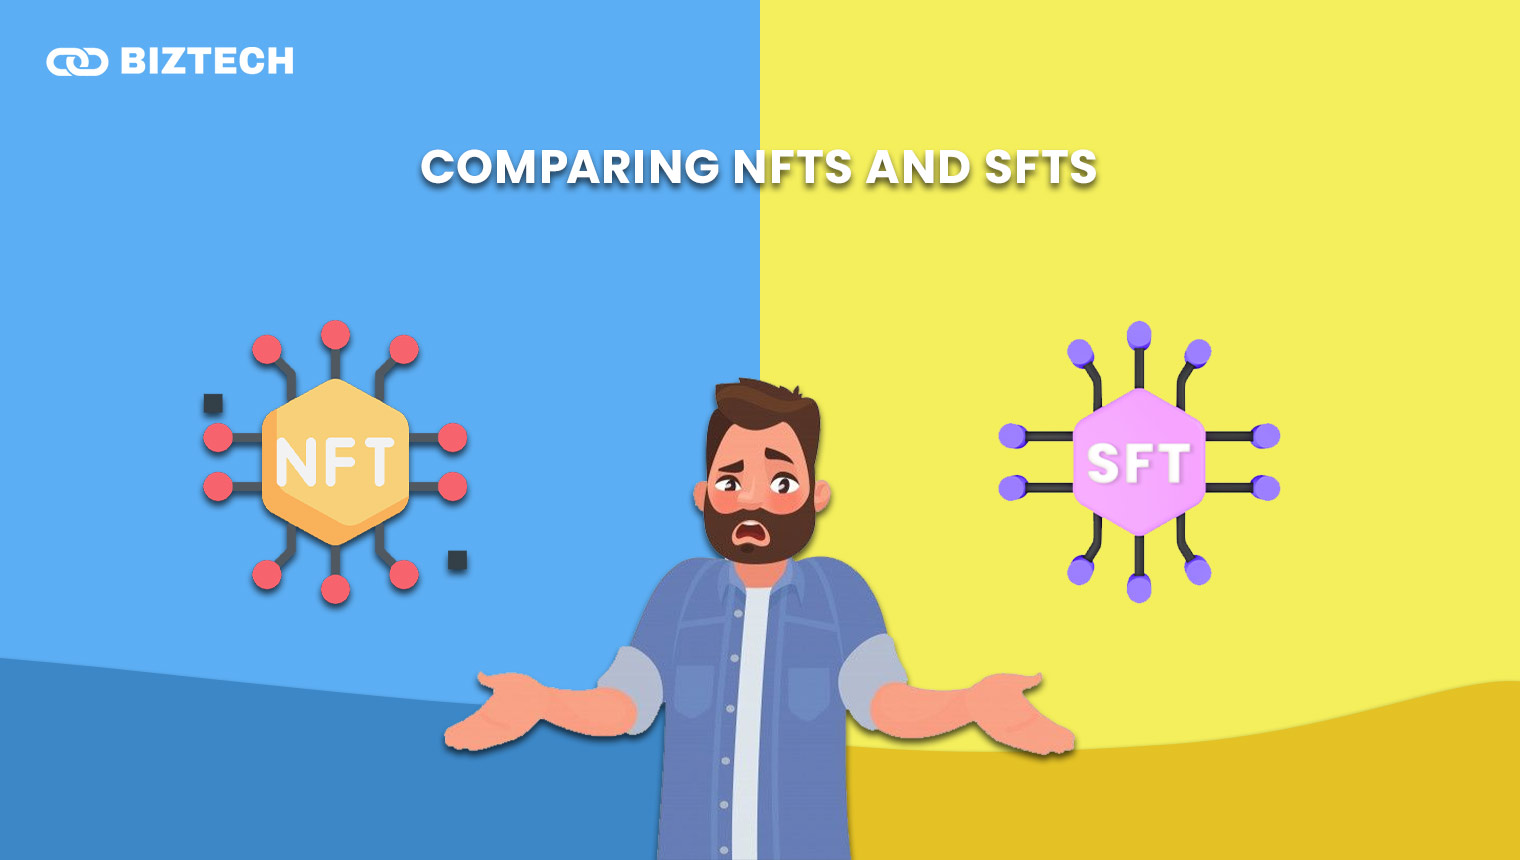 Comparing NFTs and SFTs